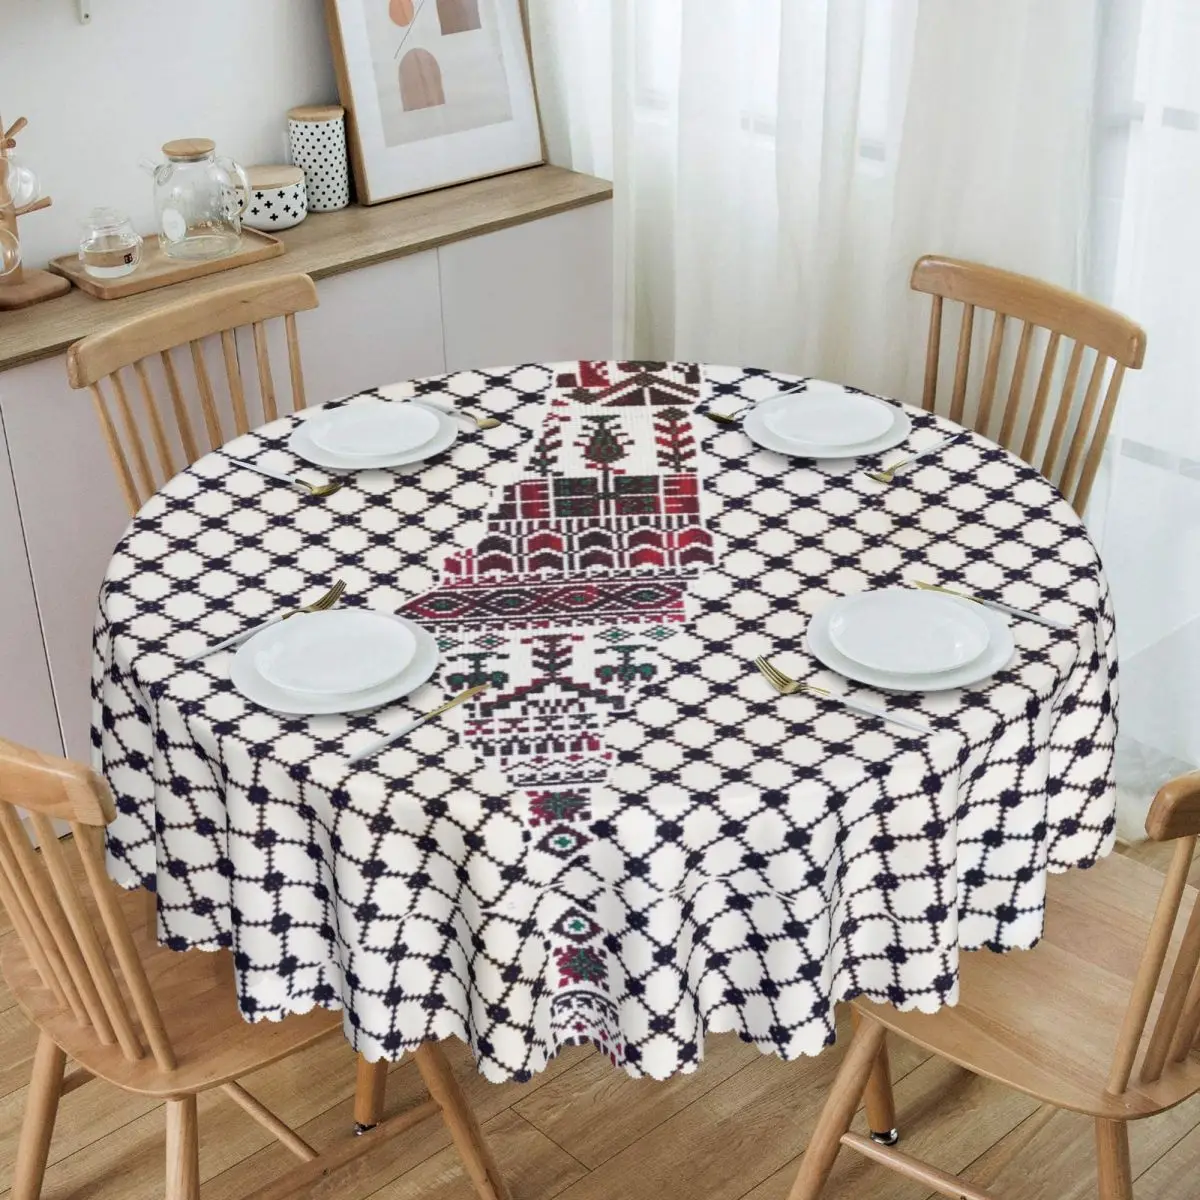 

Round Palestine Keffiyeh Palestinian Traditional Tatreez Embroidery Tablecloth Table Cover 60 inches Hatta Kufiya Table Cloth